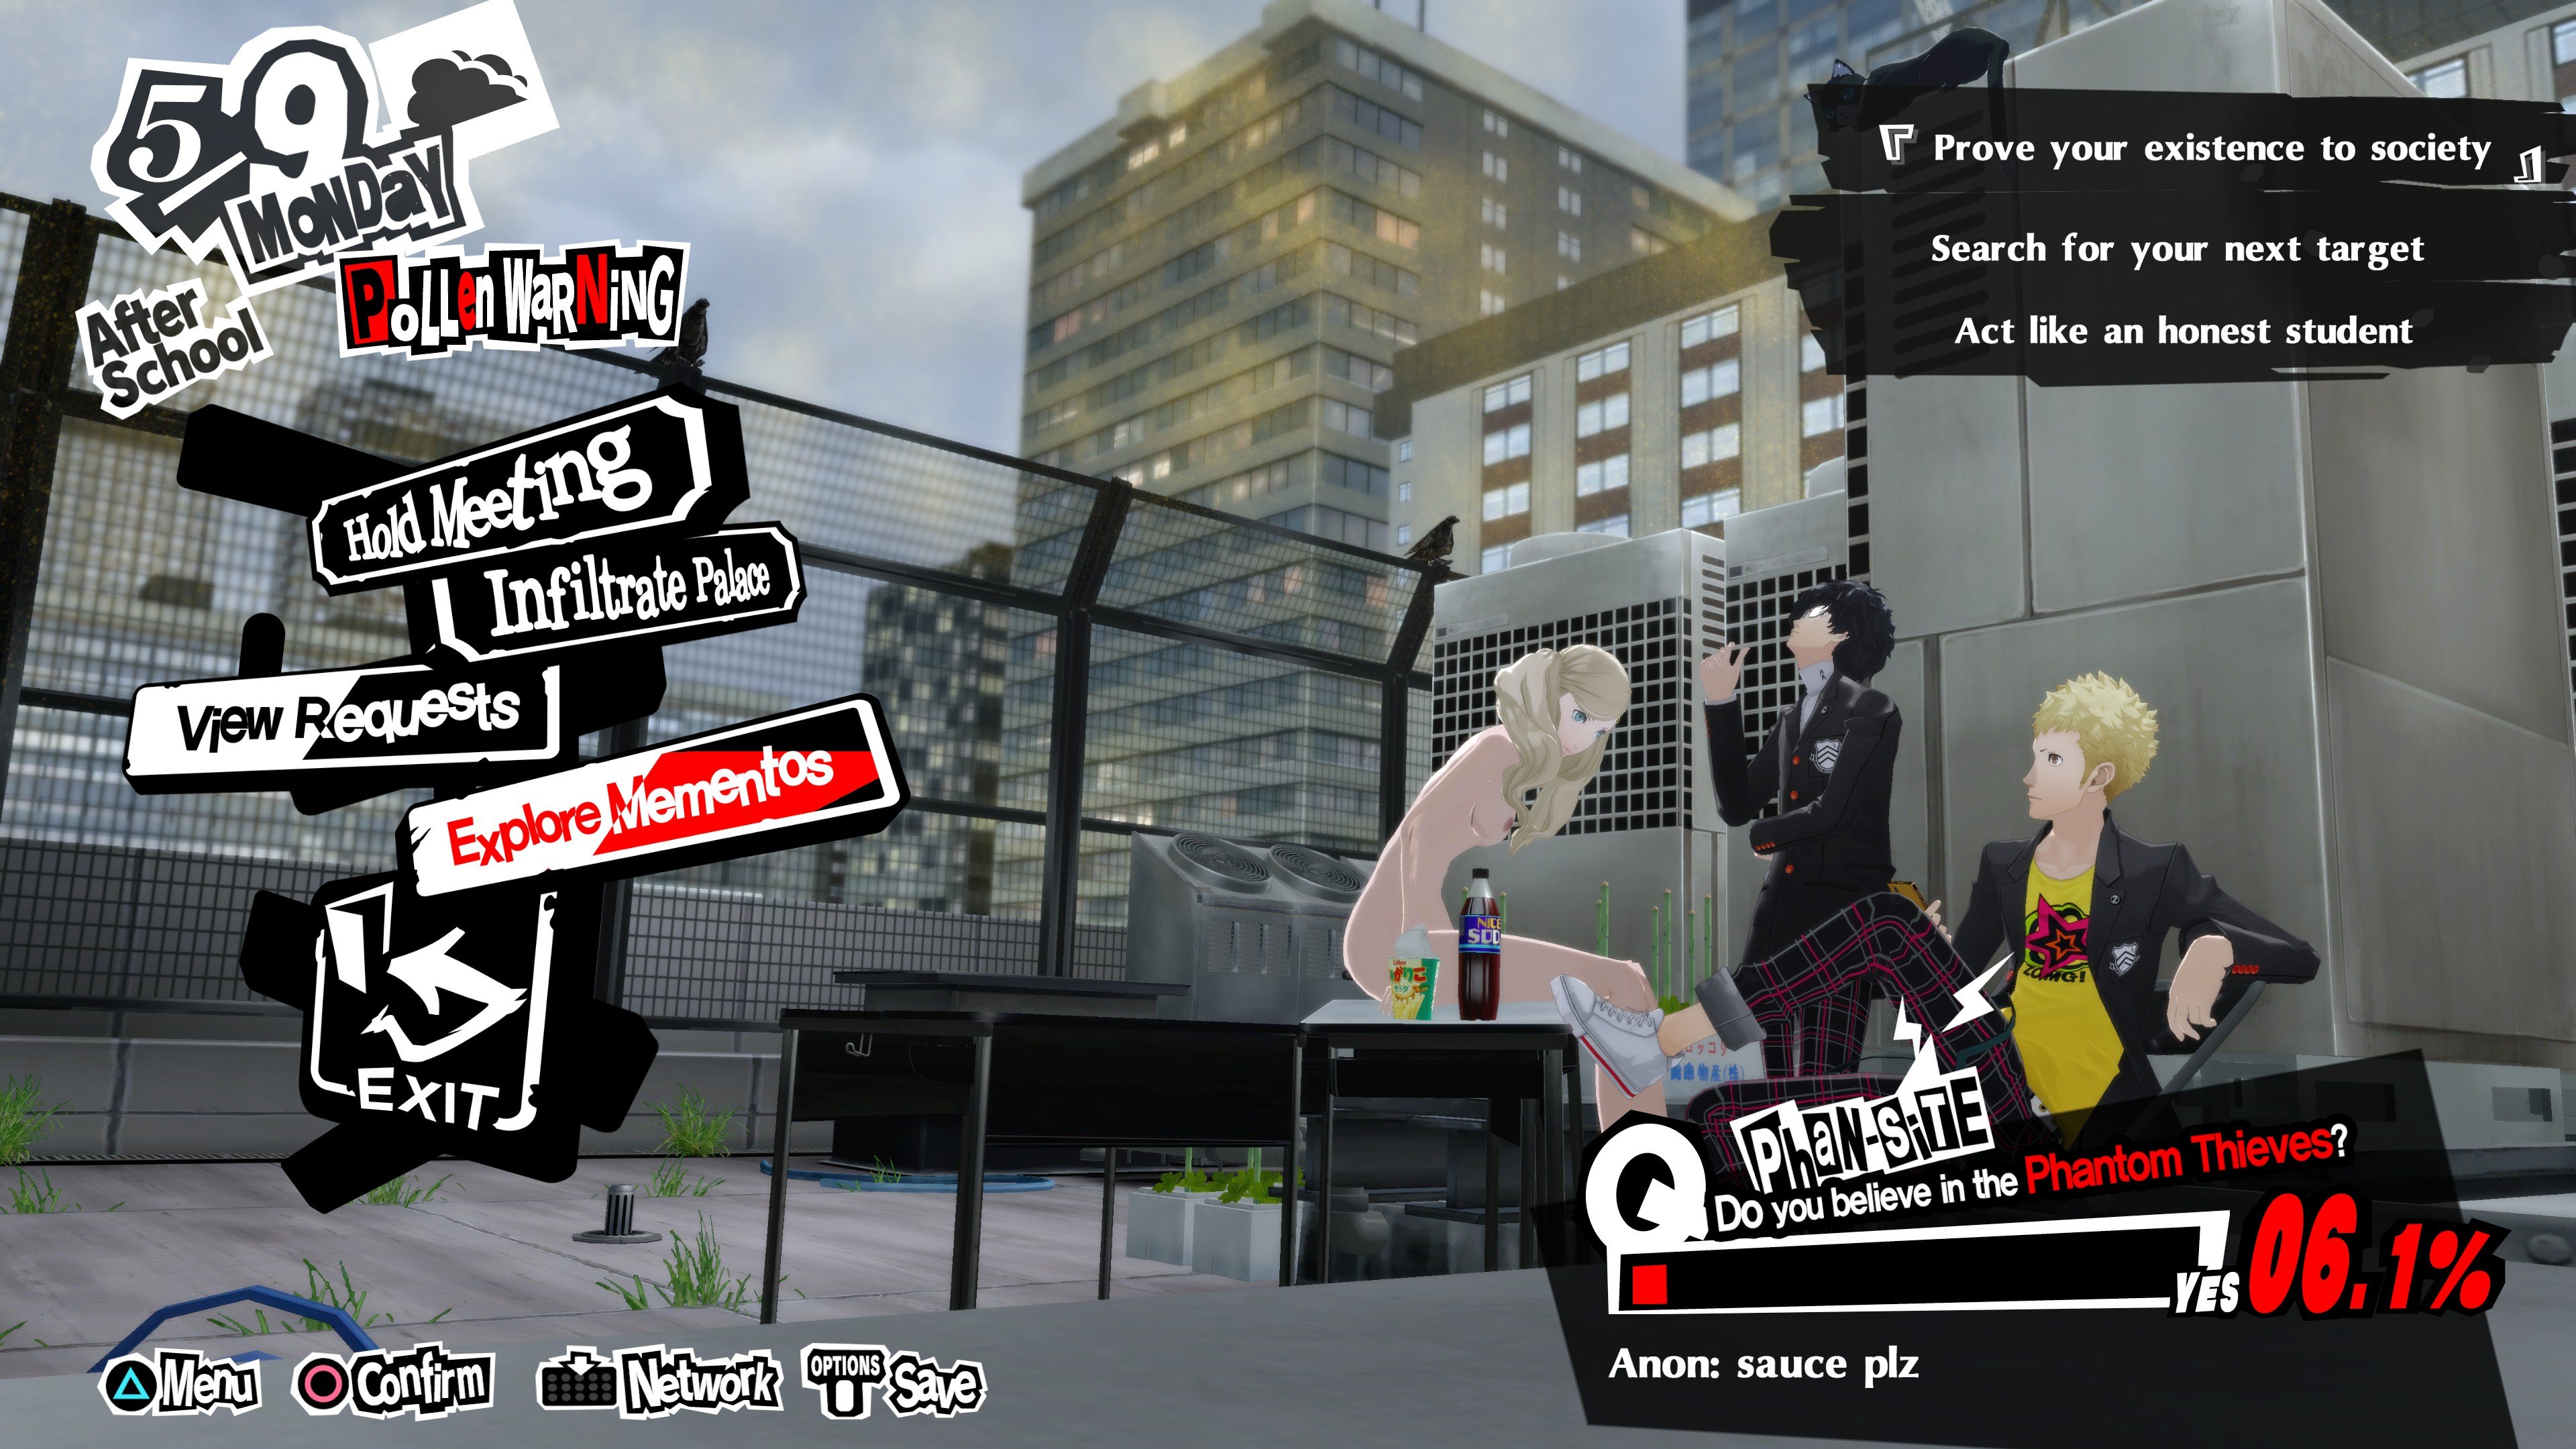 The Best PC Mods To Download For Persona 5 Royal